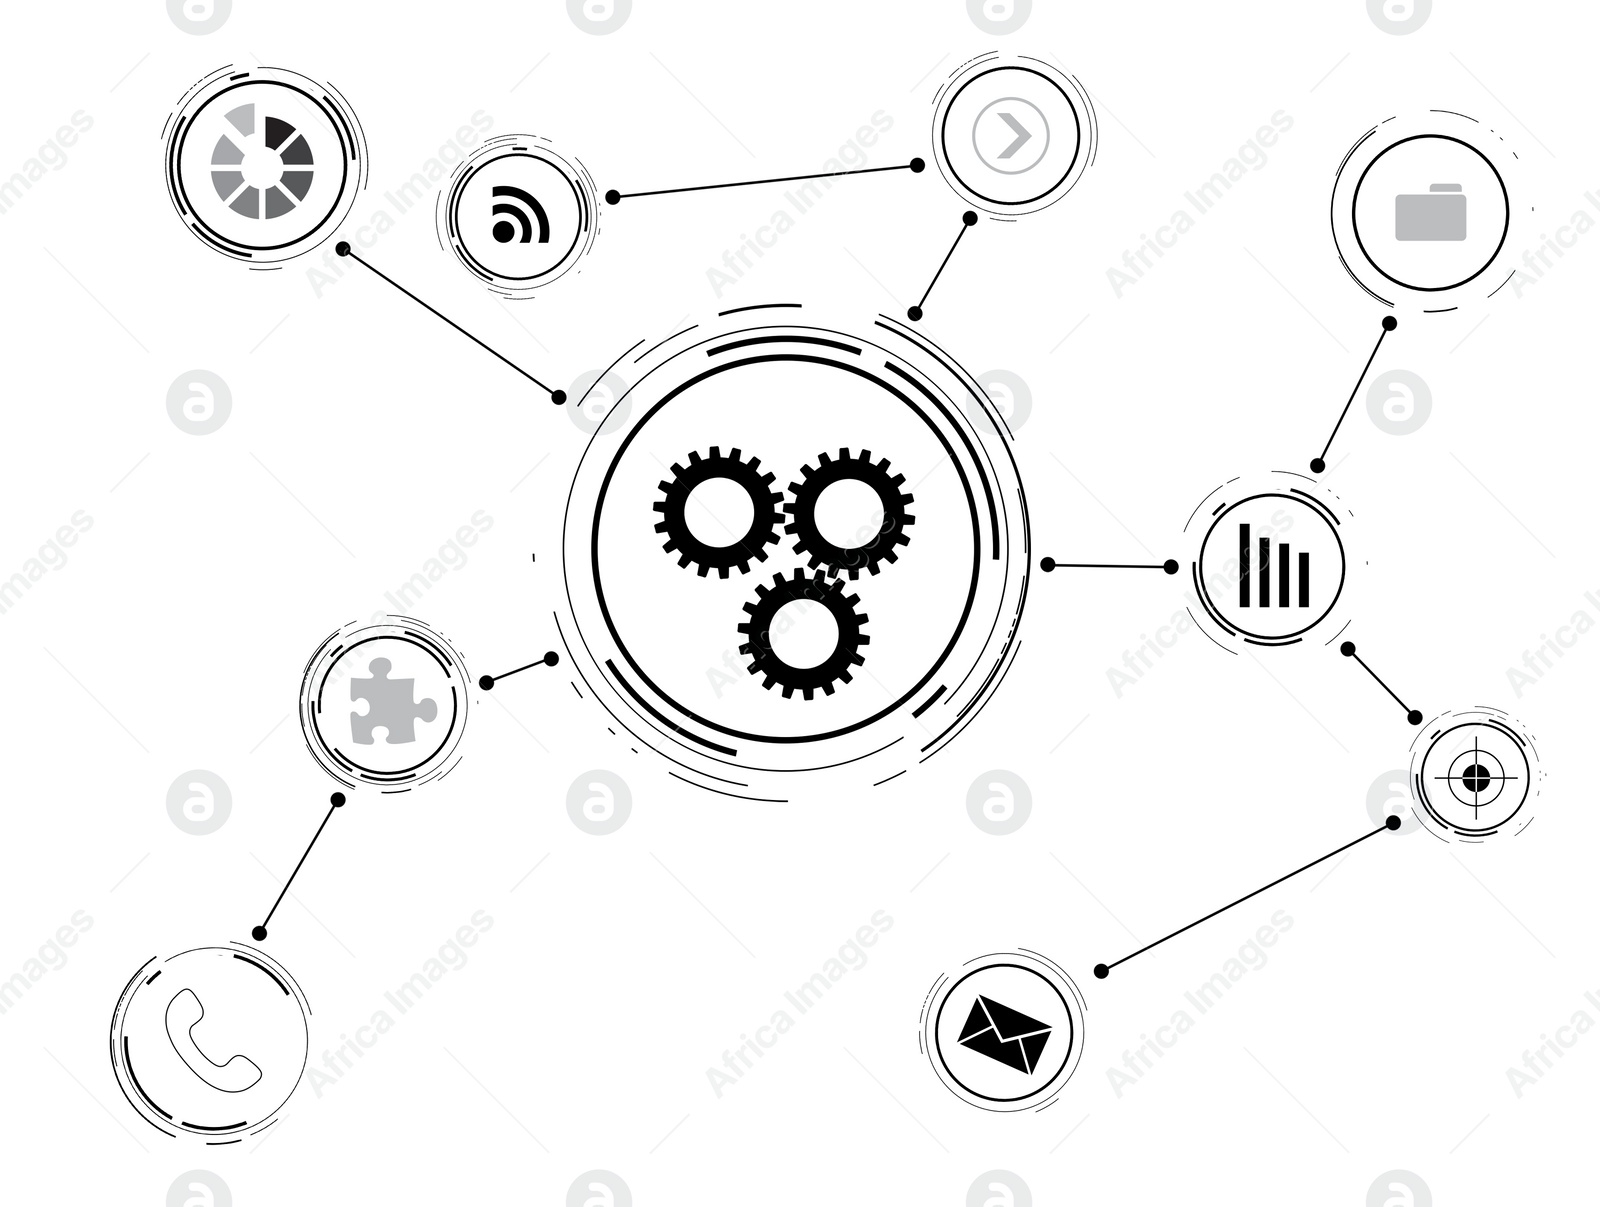 Illustration of Set of linked icons and gear mechanism on white background